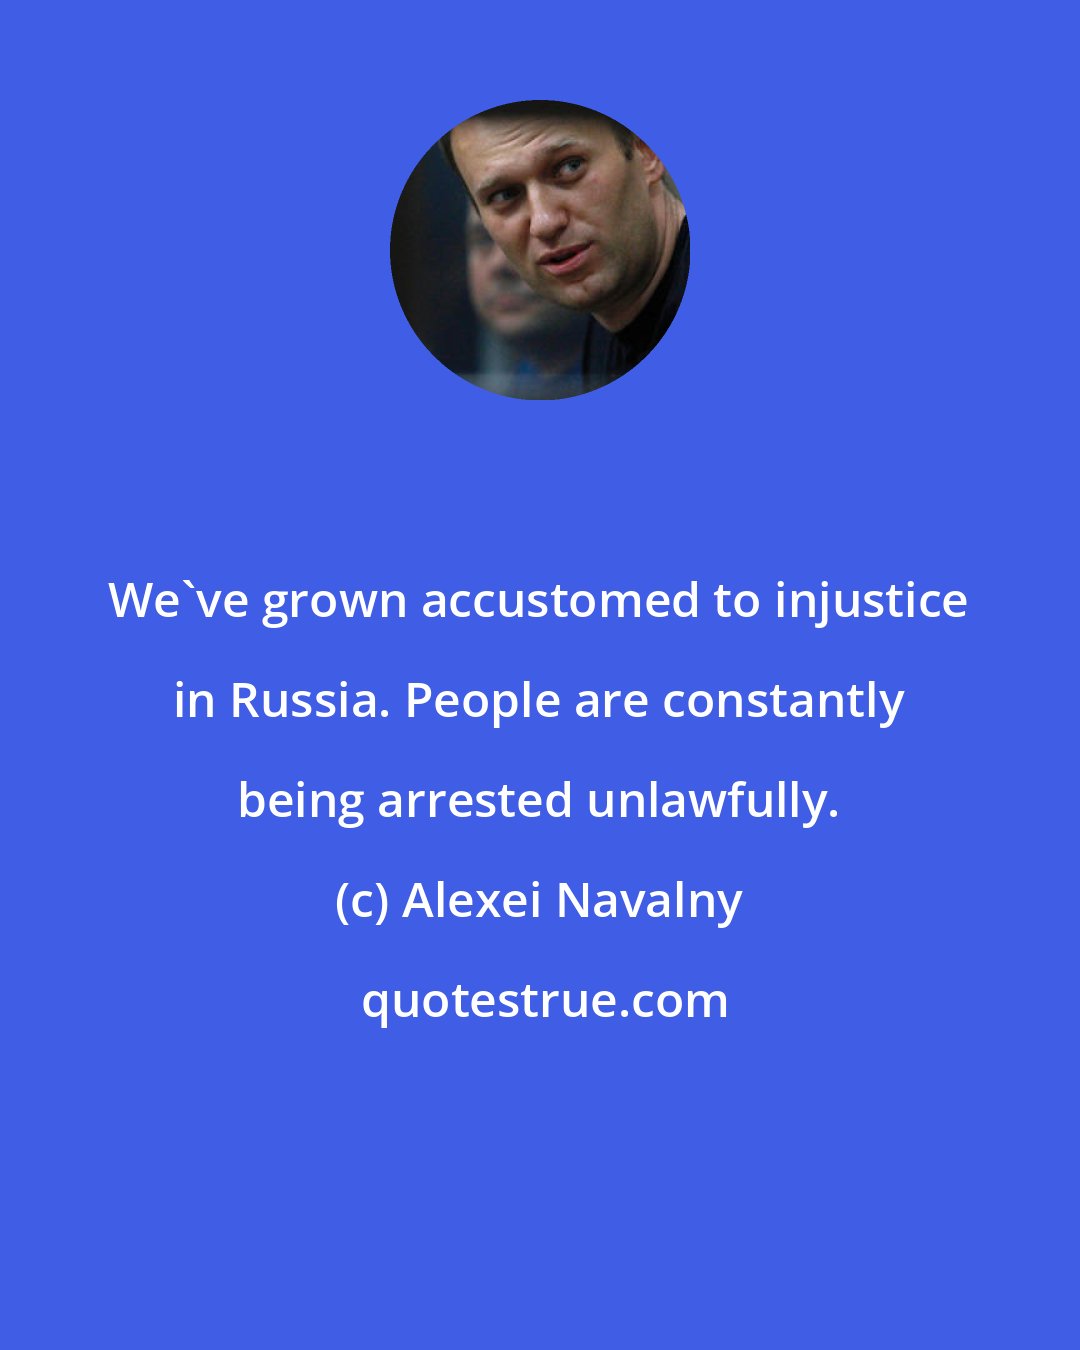 Alexei Navalny: We've grown accustomed to injustice in Russia. People are constantly being arrested unlawfully.